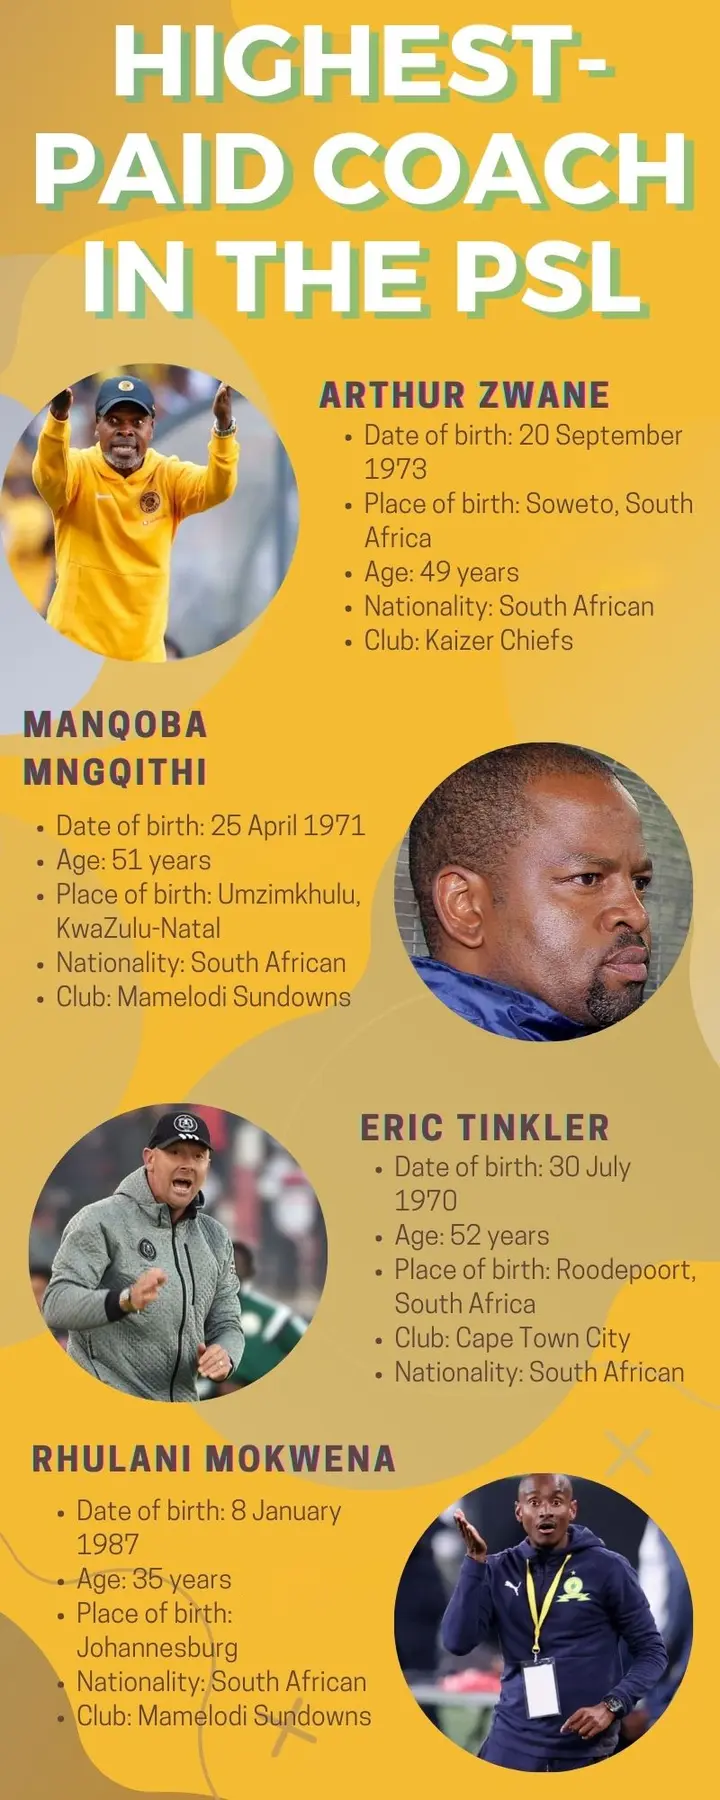 highest-paid coach in the PSL